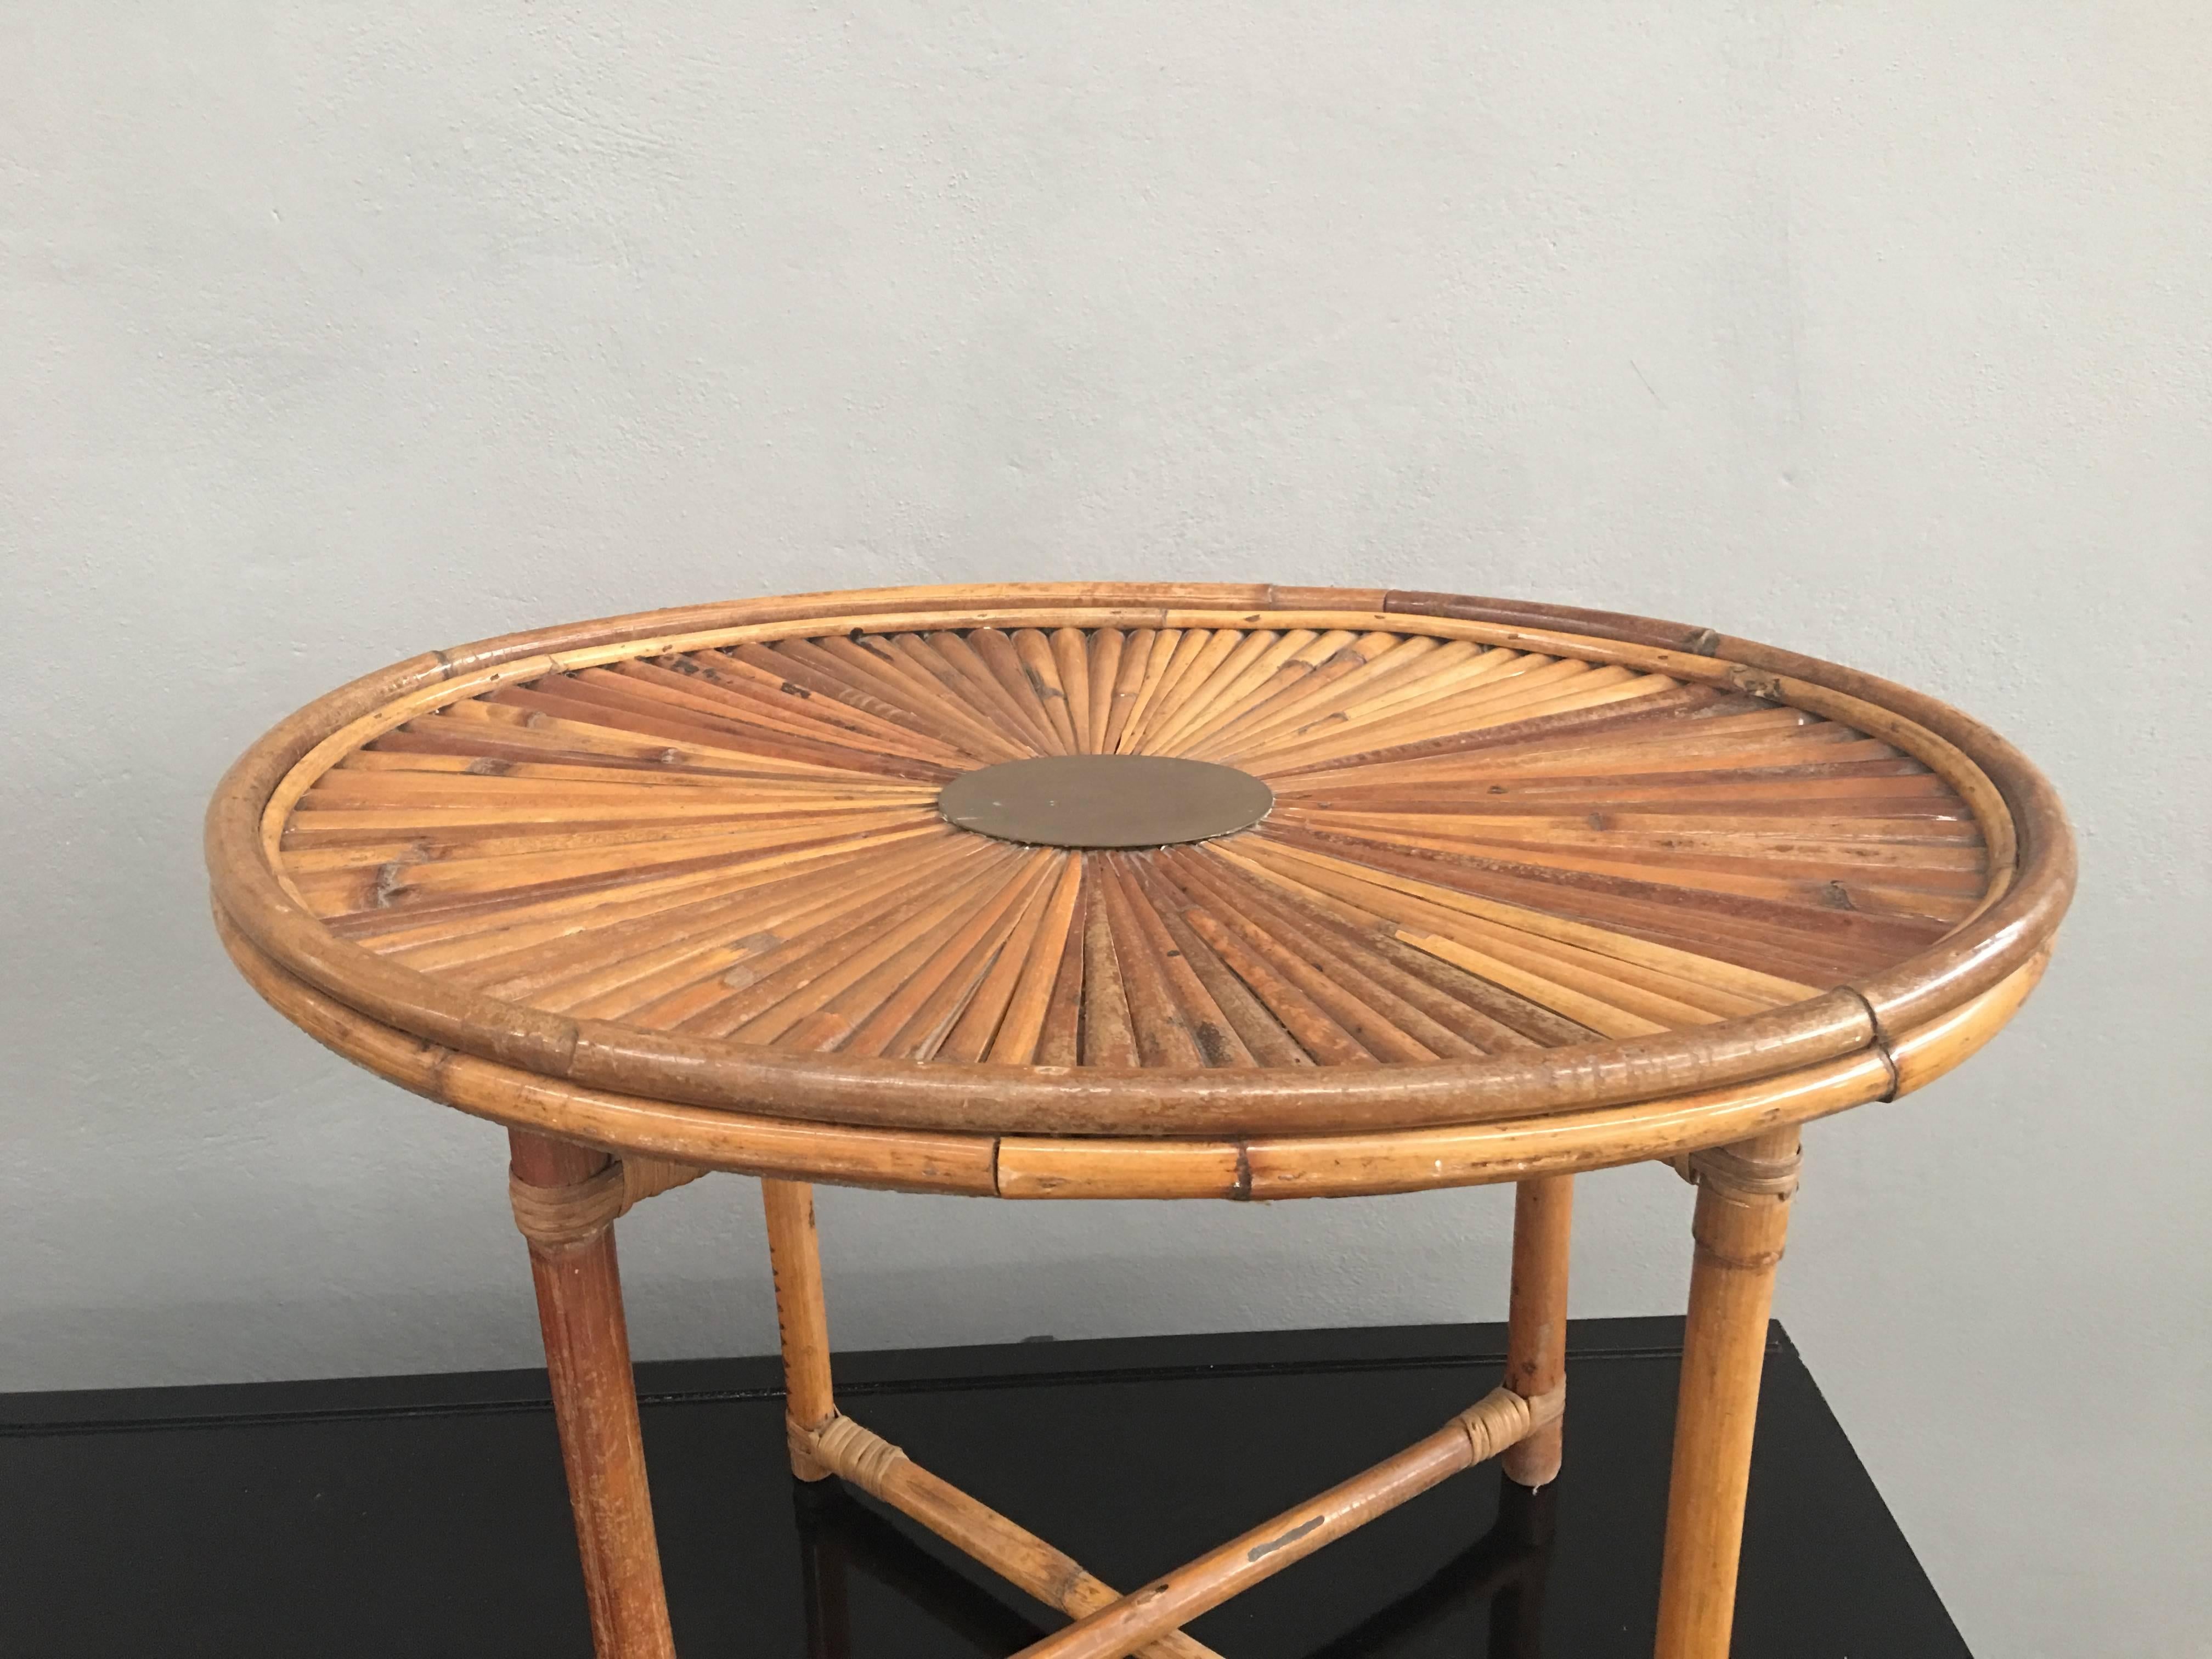 Oval bamboo and brass coffee table signed Gabriella Crespi.